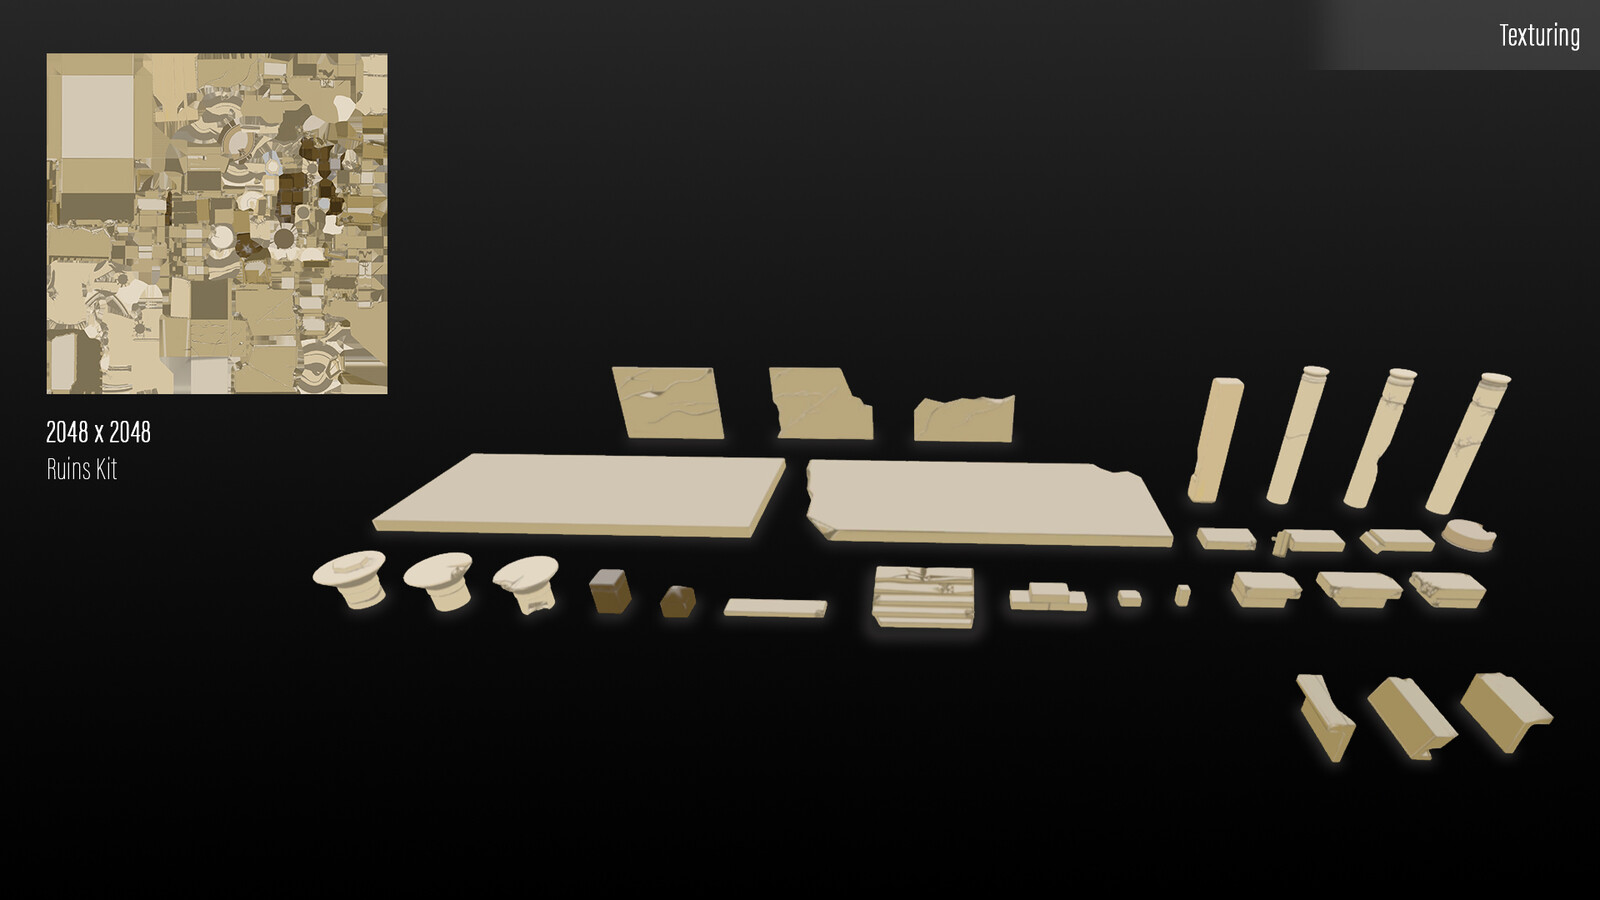 Texturing of a Ruins Kit
Modelling by Elizaveta